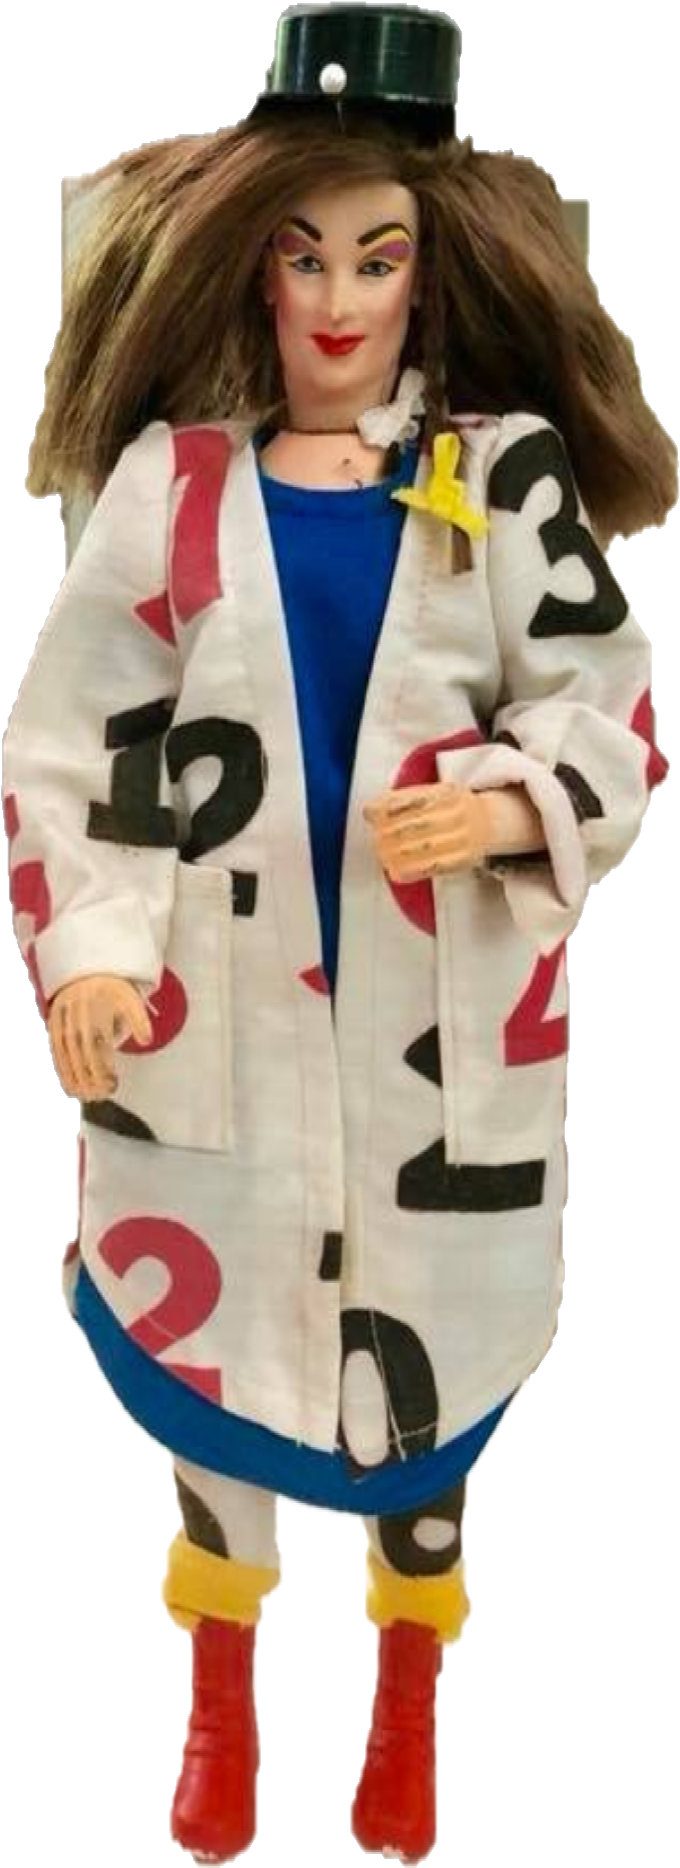 Compare The 12" Boy George Fashion Doll To The 10" - Costume Hat (1683x2079), Png Download